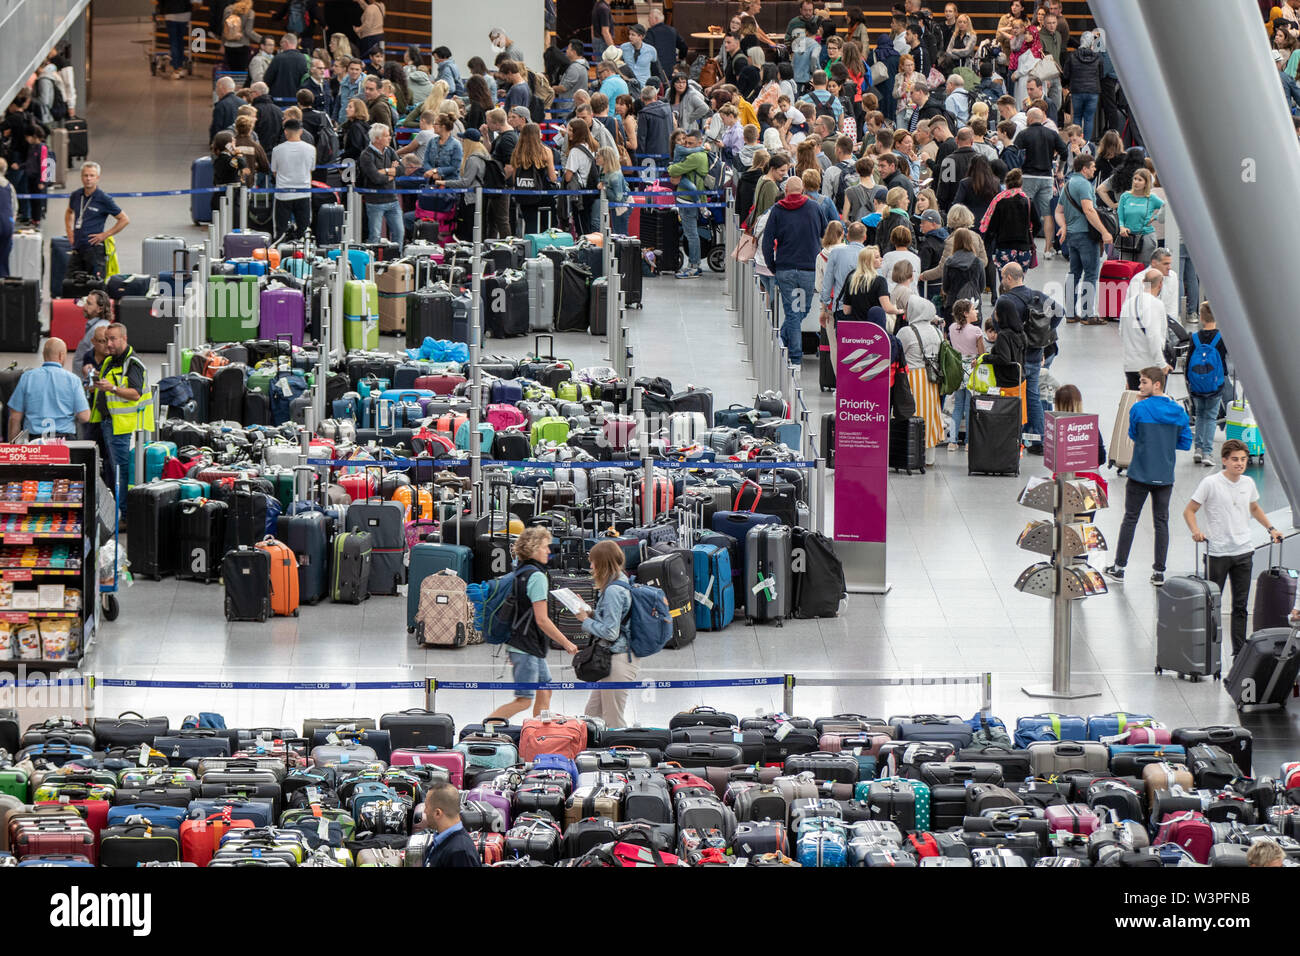 Duesseldorf, Germany. 17th July, 2019. Several hundred pieces of baggage  are standing in the departure hall of Düsseldorf Airport, blue ribbons with  the inscription Düsseldorf Airport DUS close off the area. Due